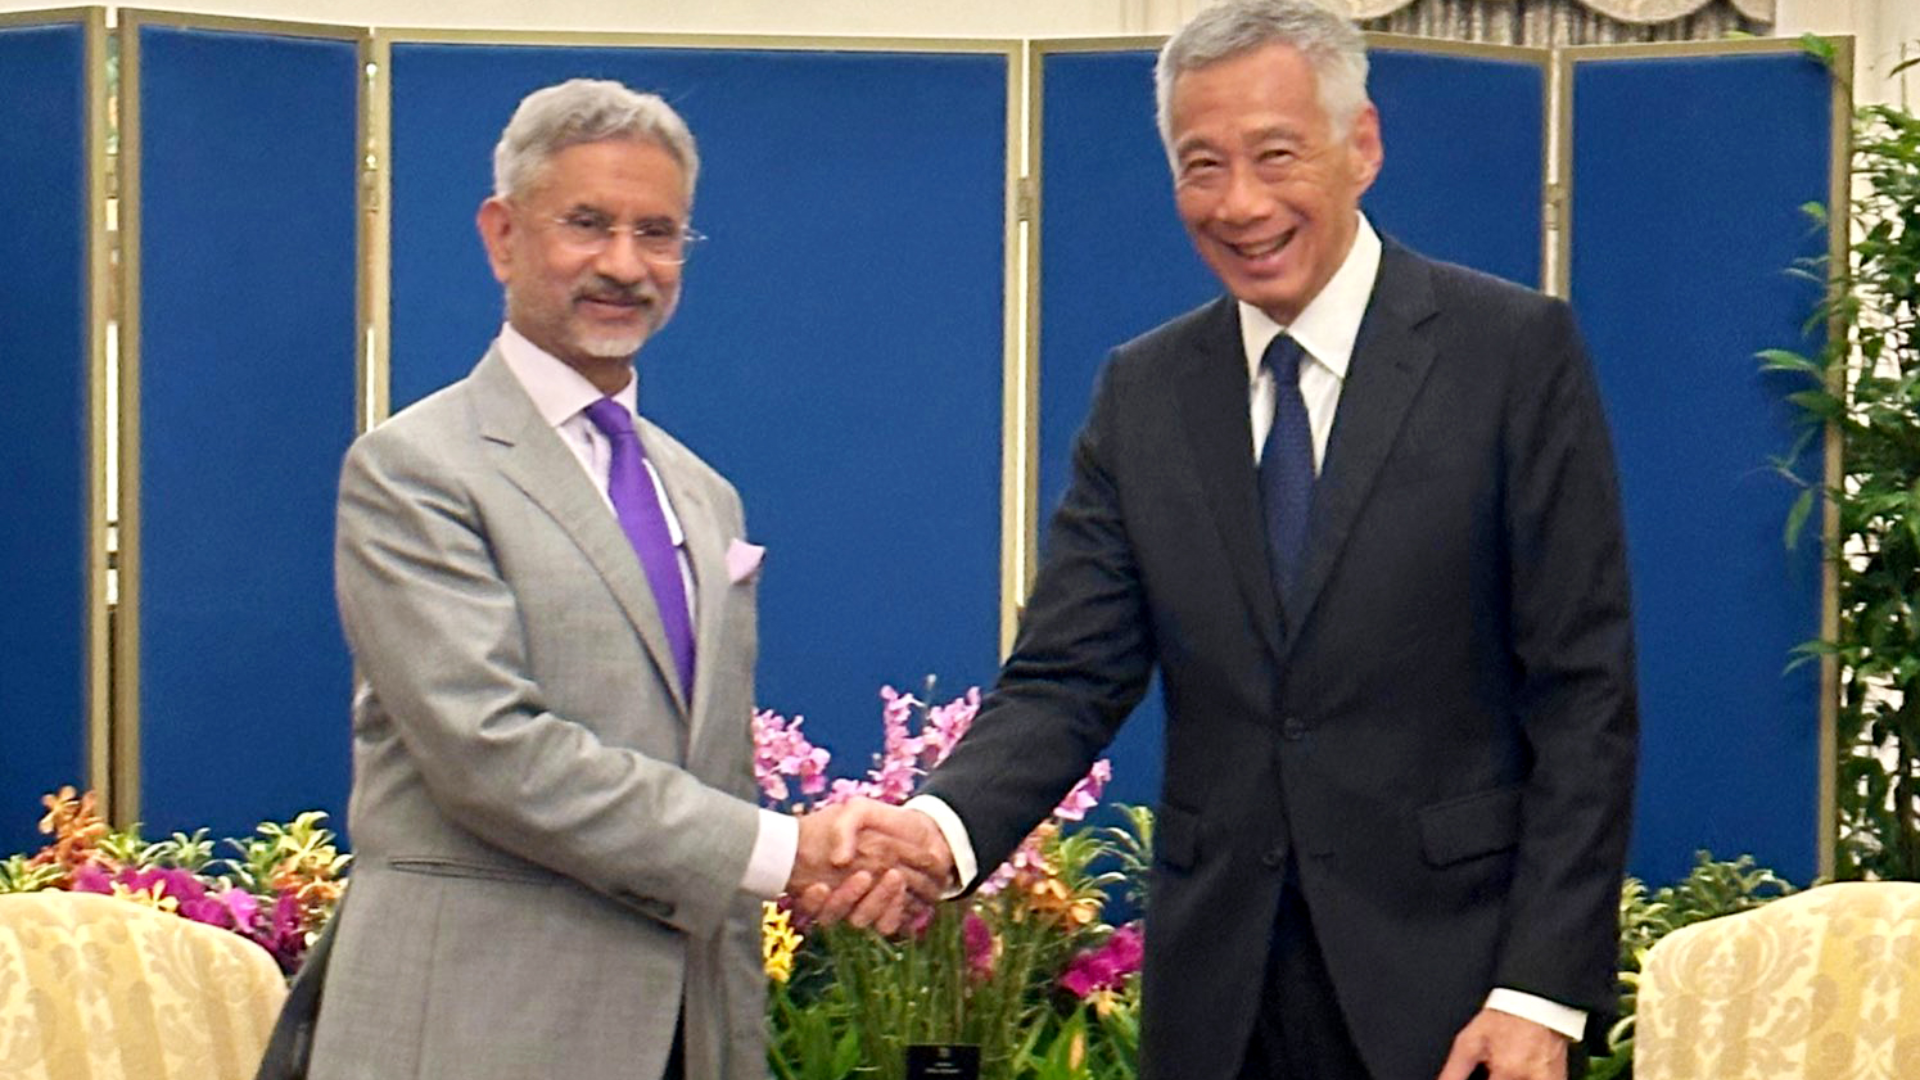 Jaishankar And Singapore PM Discuss Strengthening Collaboration In Fintech, Digitalization, And Green Economy